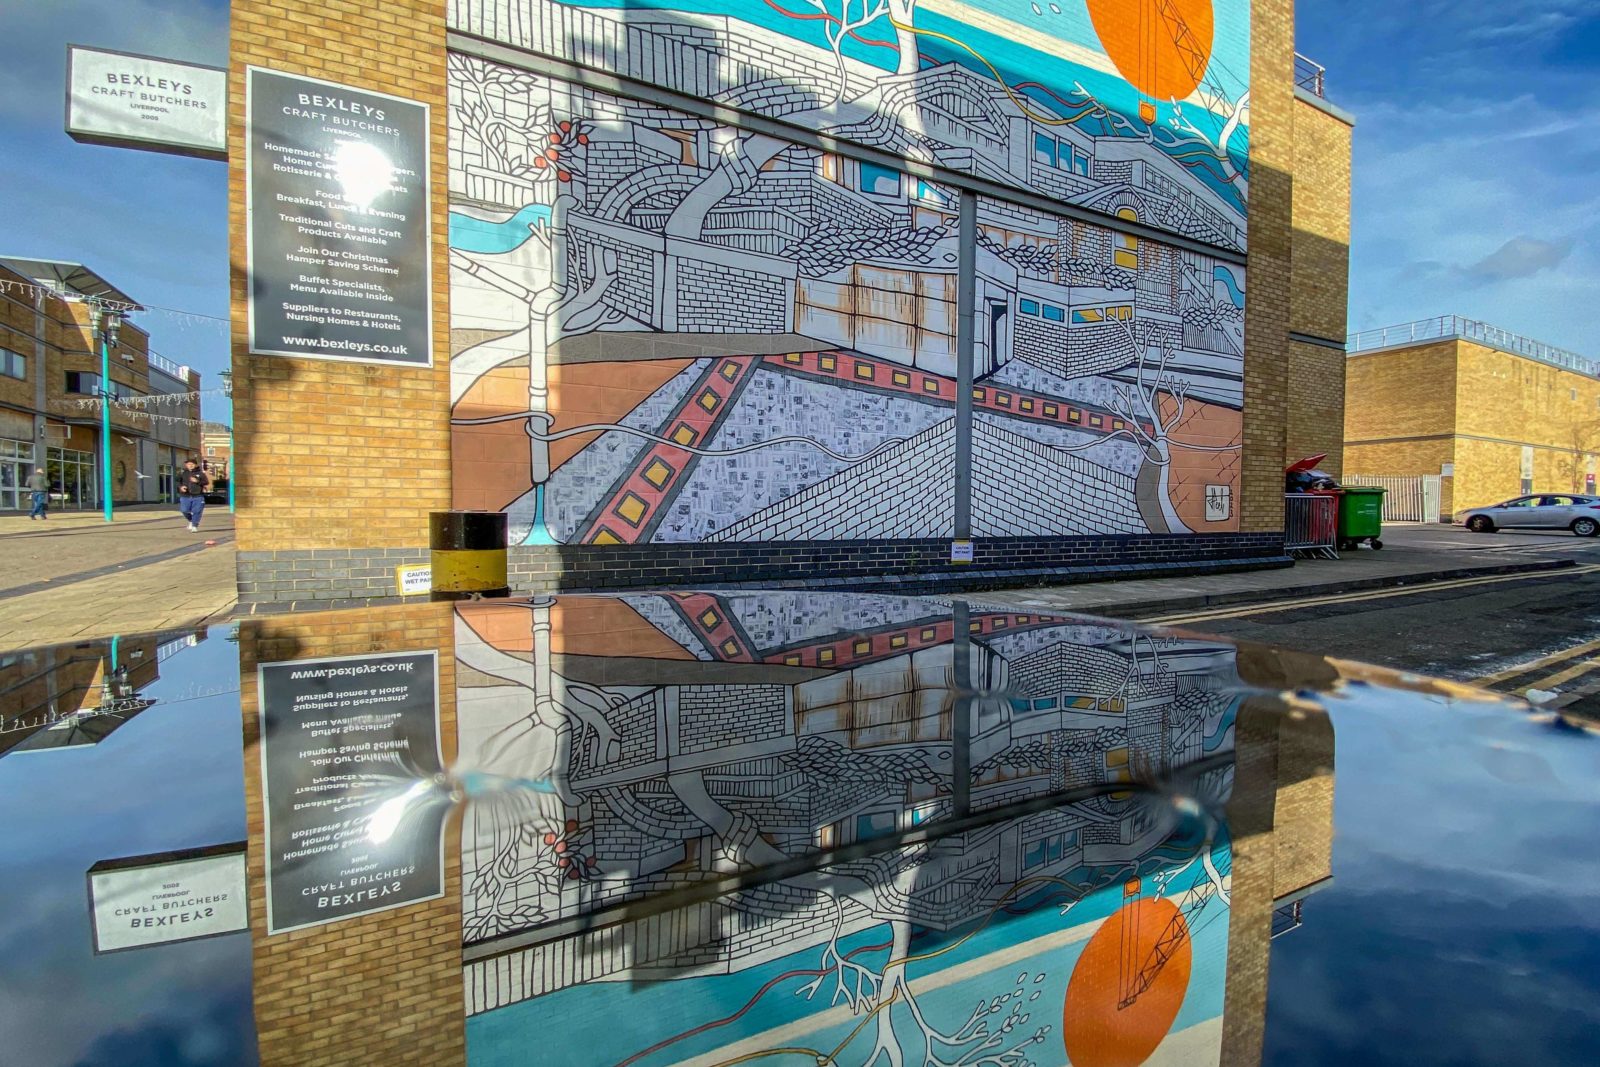 The mural is photographed on a sunny day, the puddle on the ground below it shows its reflection.